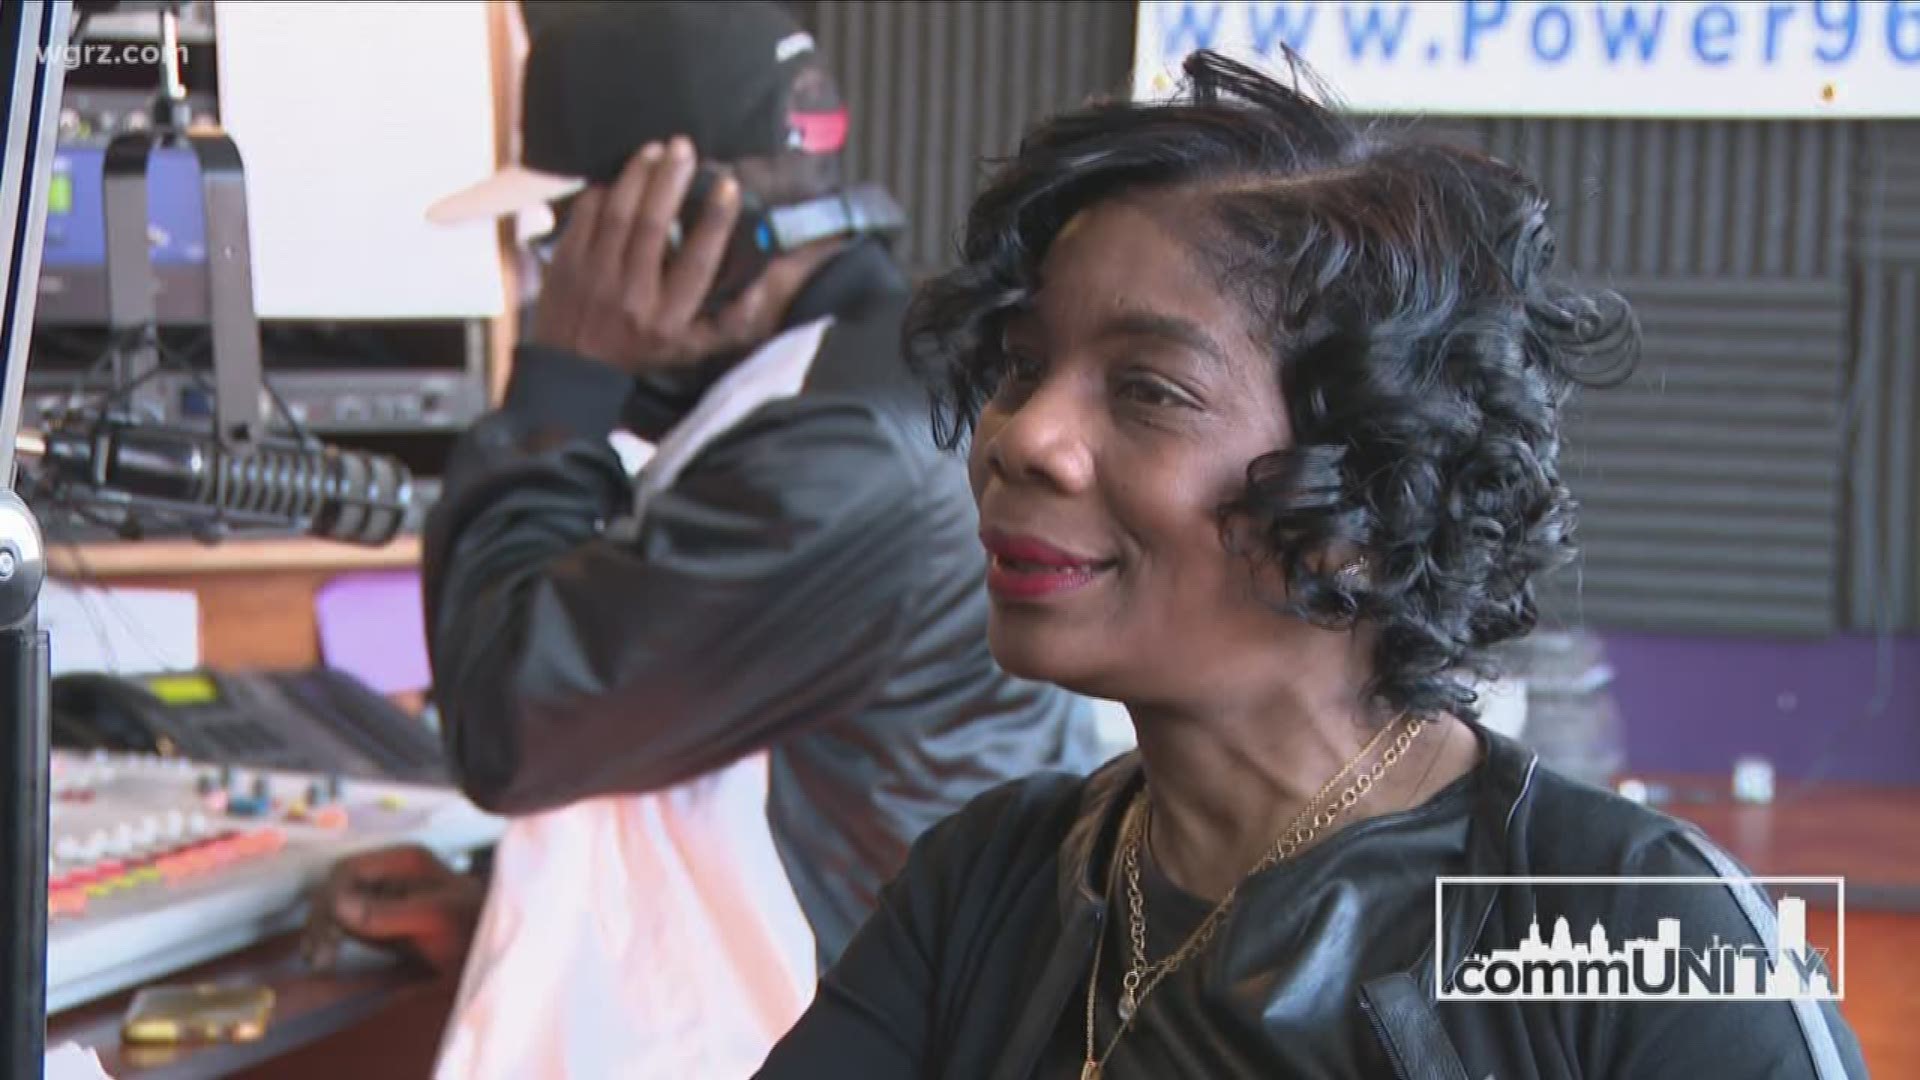 Sheila Brown is the first African-American woman to own a radio station in Western New York.